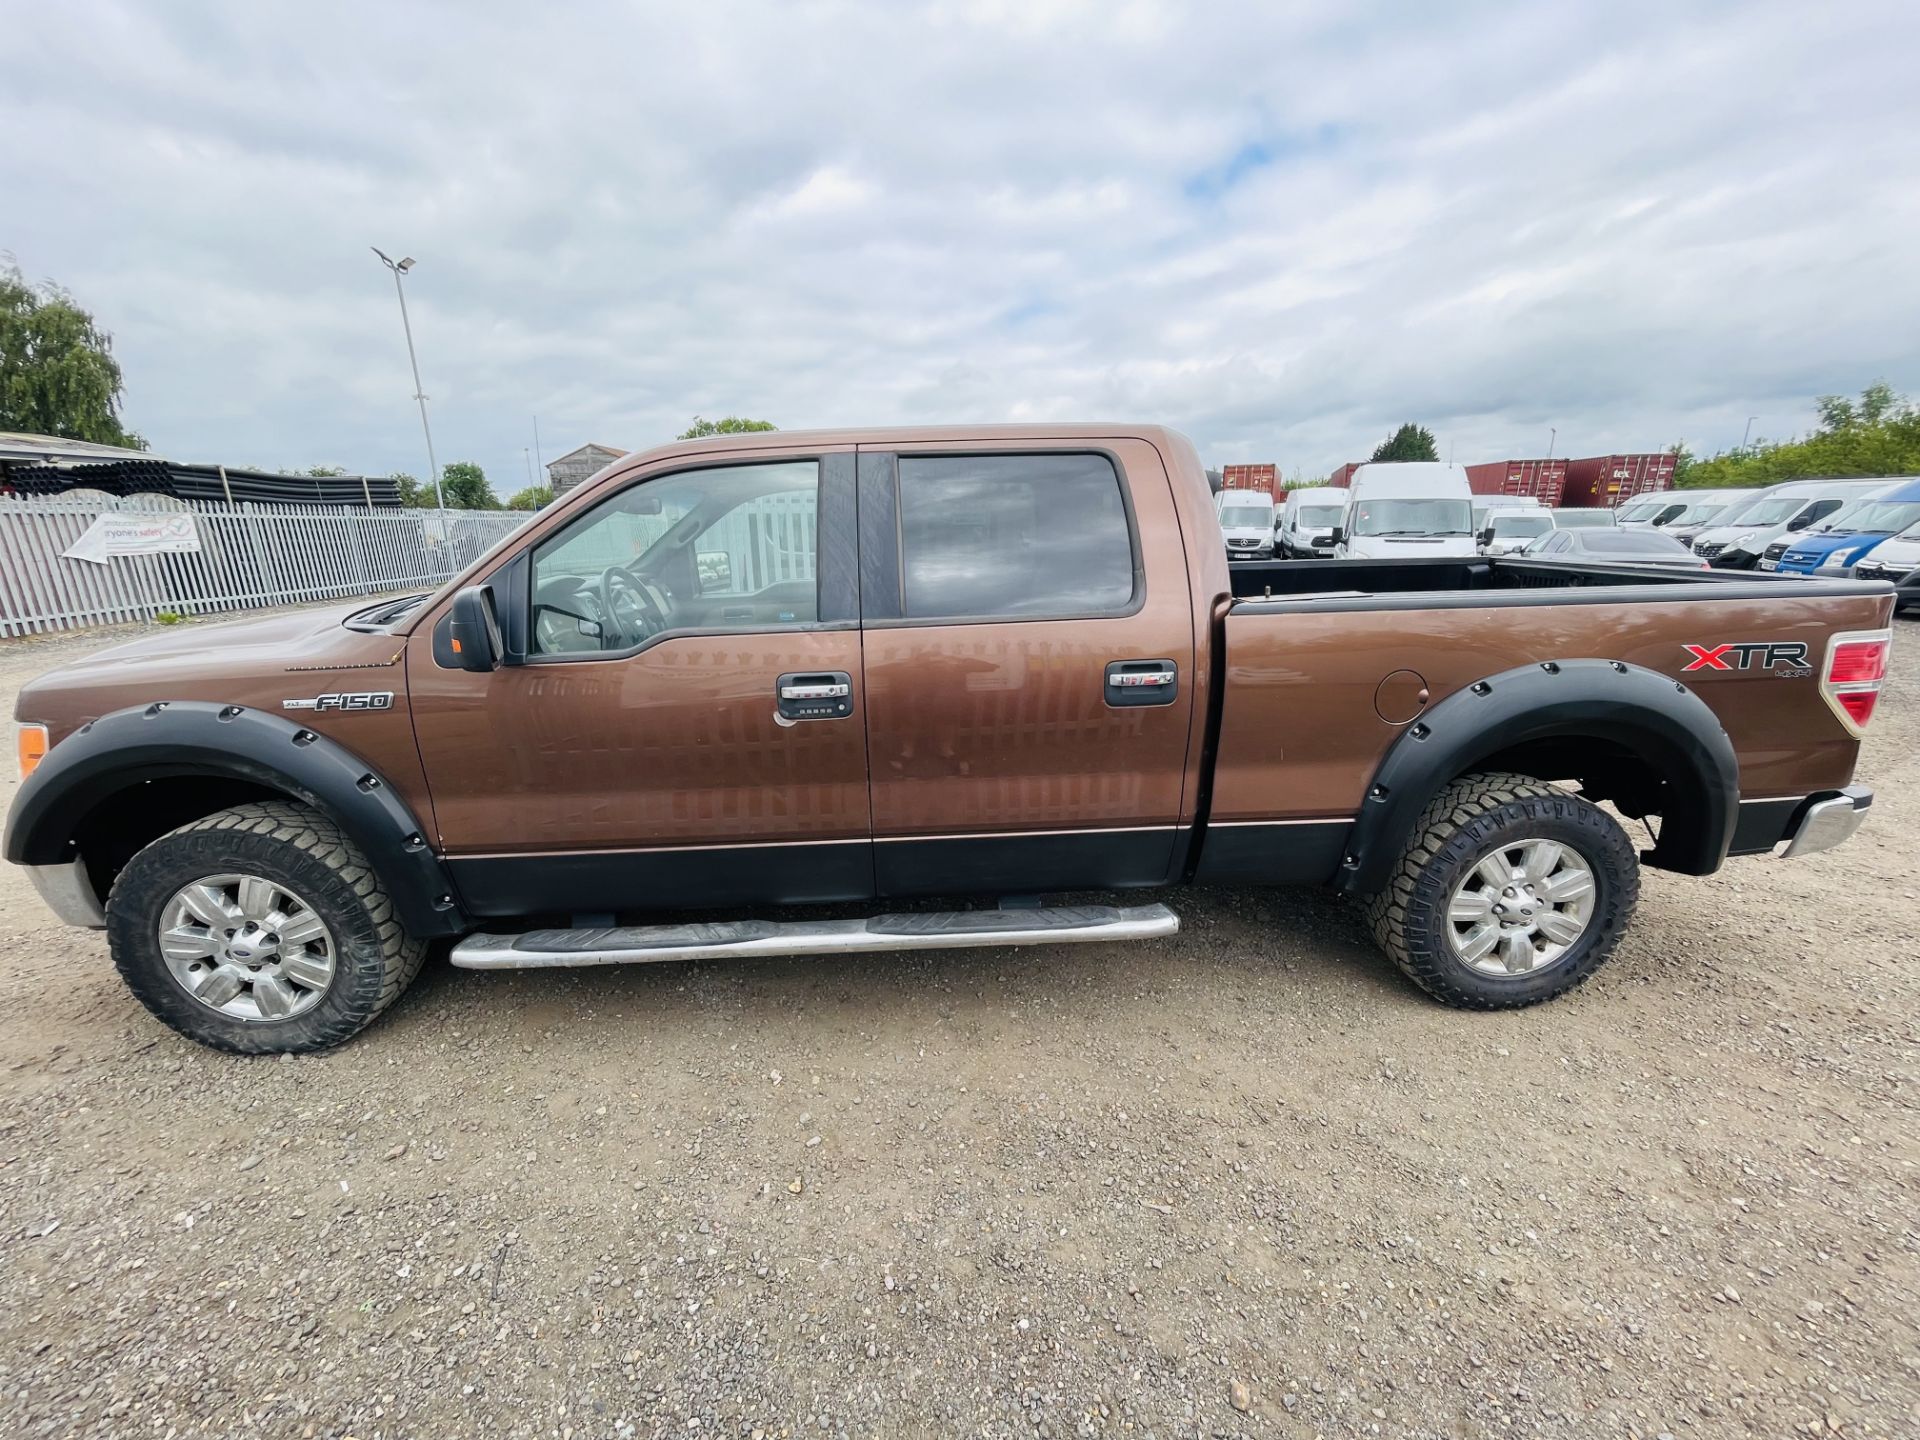 ** ON SALE ** Ford F-150 5.0L V8 XLT XTR Edition Super-Crew 4X4 '2011 Year' - 6 Seats - Air Con - - Image 6 of 27